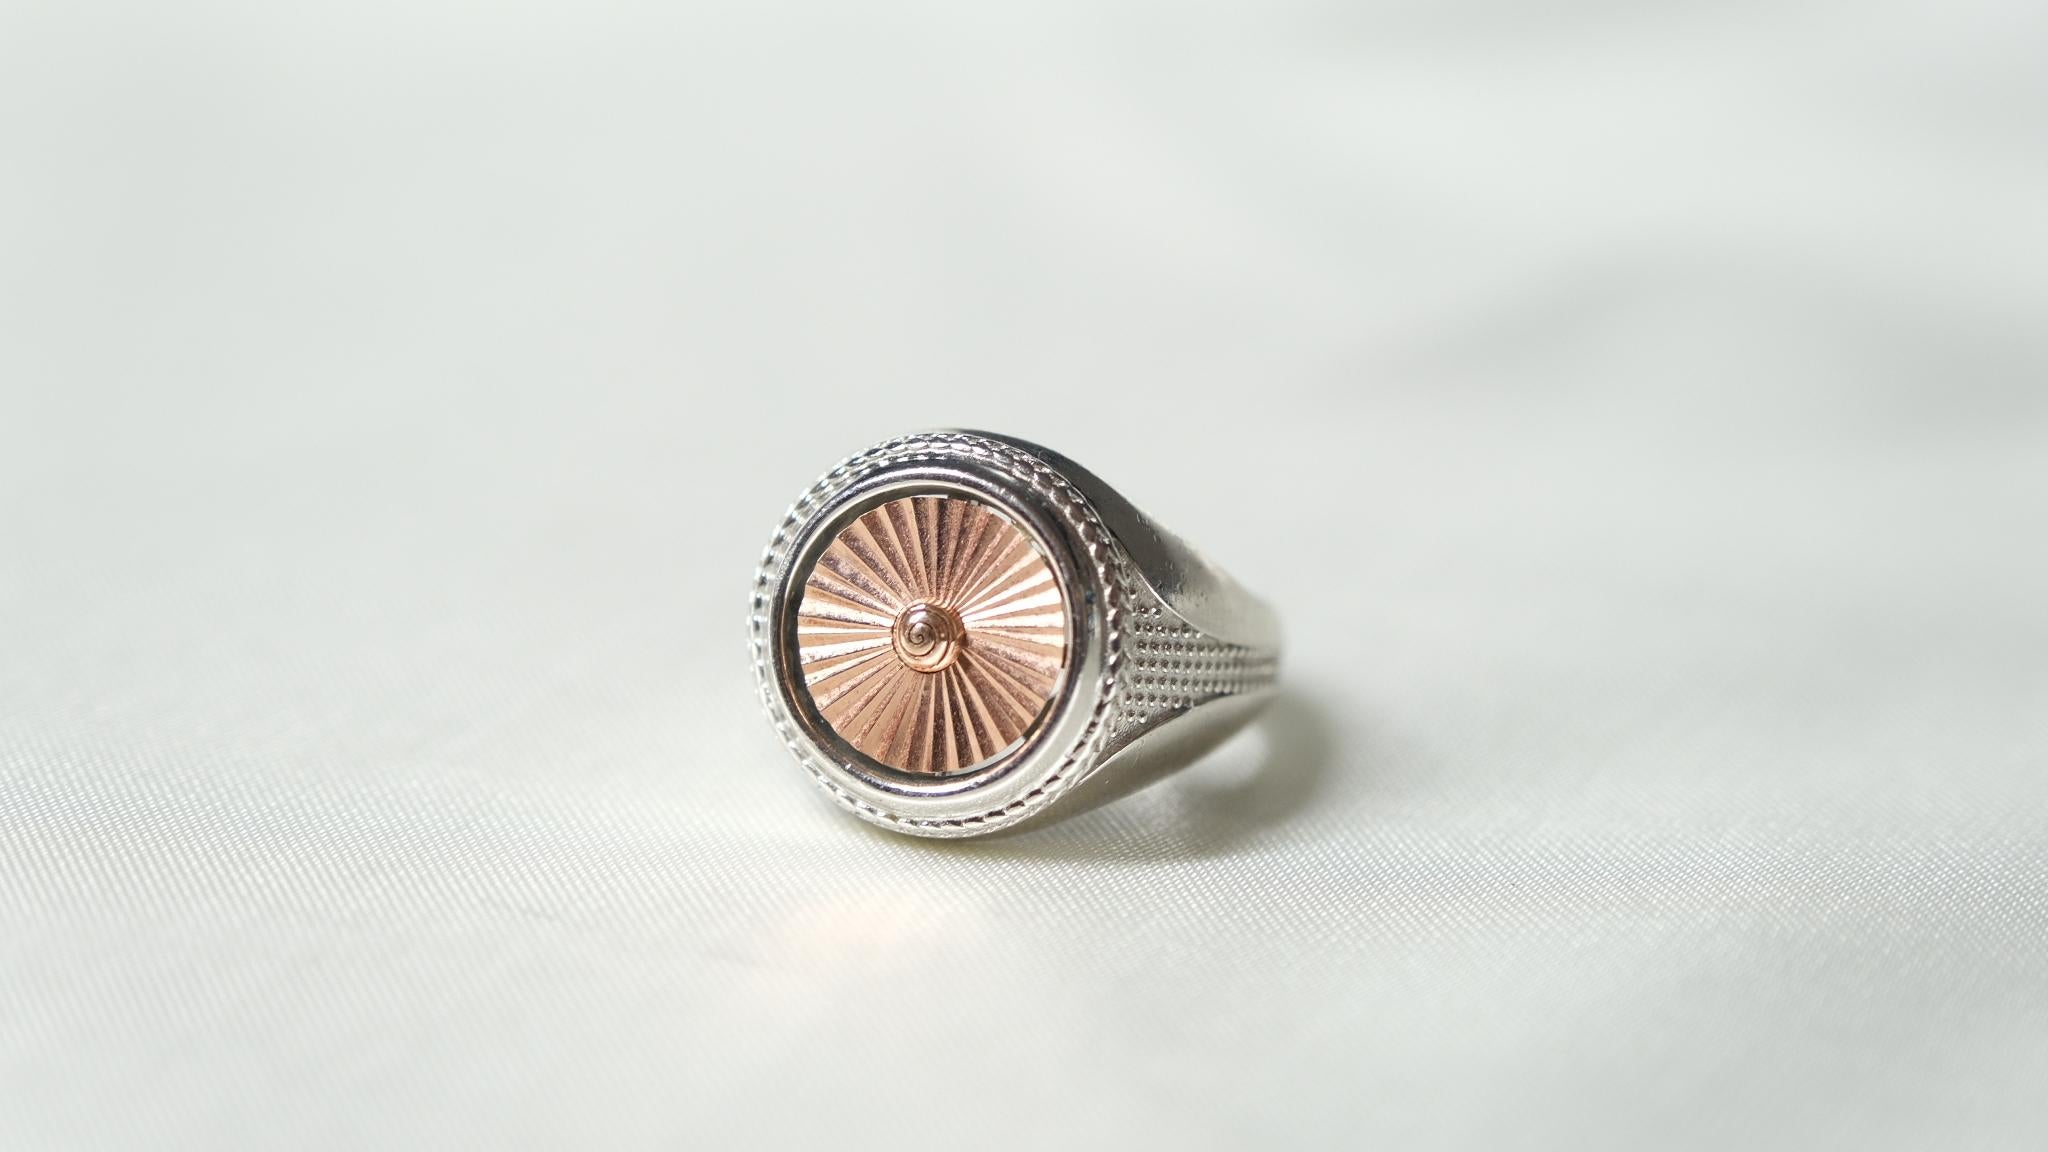 The Ugo signet ring is serendipitous as it is flawless. A merge of two designs to bring an allure that is captivating yet affirming. Officially Hallmarked at the Assay Office, UK. This item is Made to Order.

Product Details:

Metal : 18K White/Rose